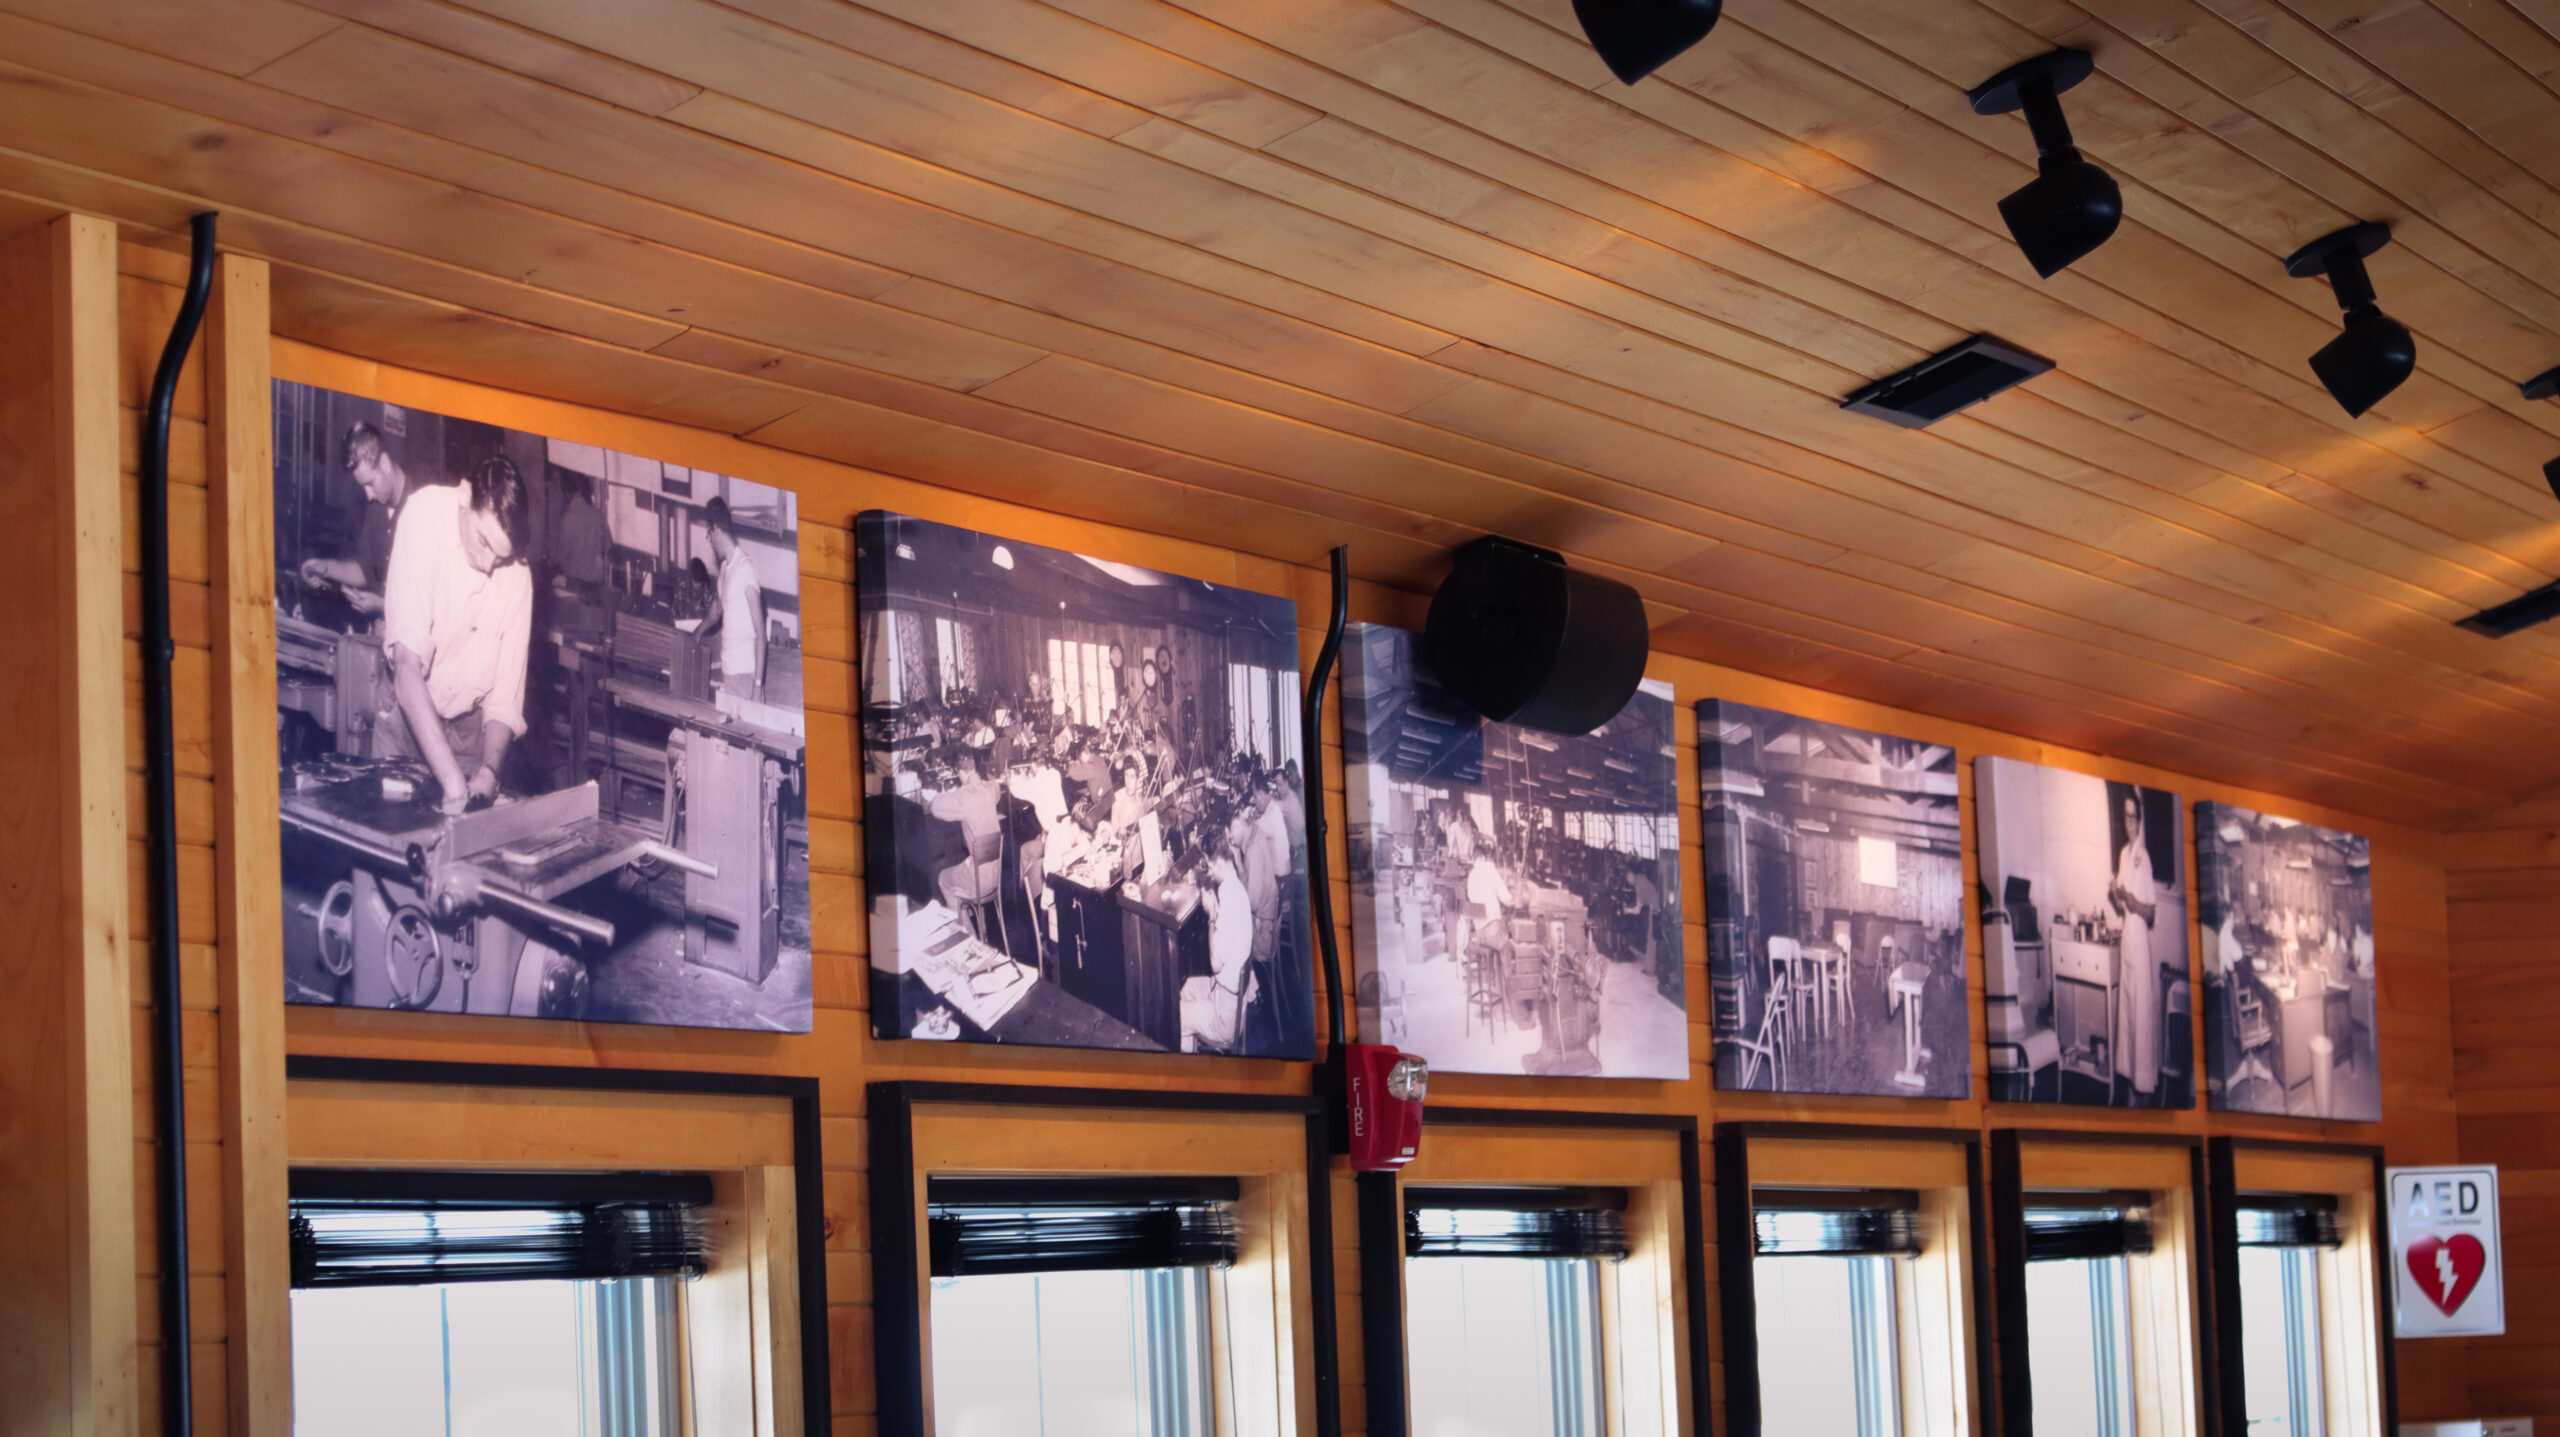 Wall mounted sound dampening panels are featured n this post on how the Best Sound Management Solutions Use 2-Tiered Approach